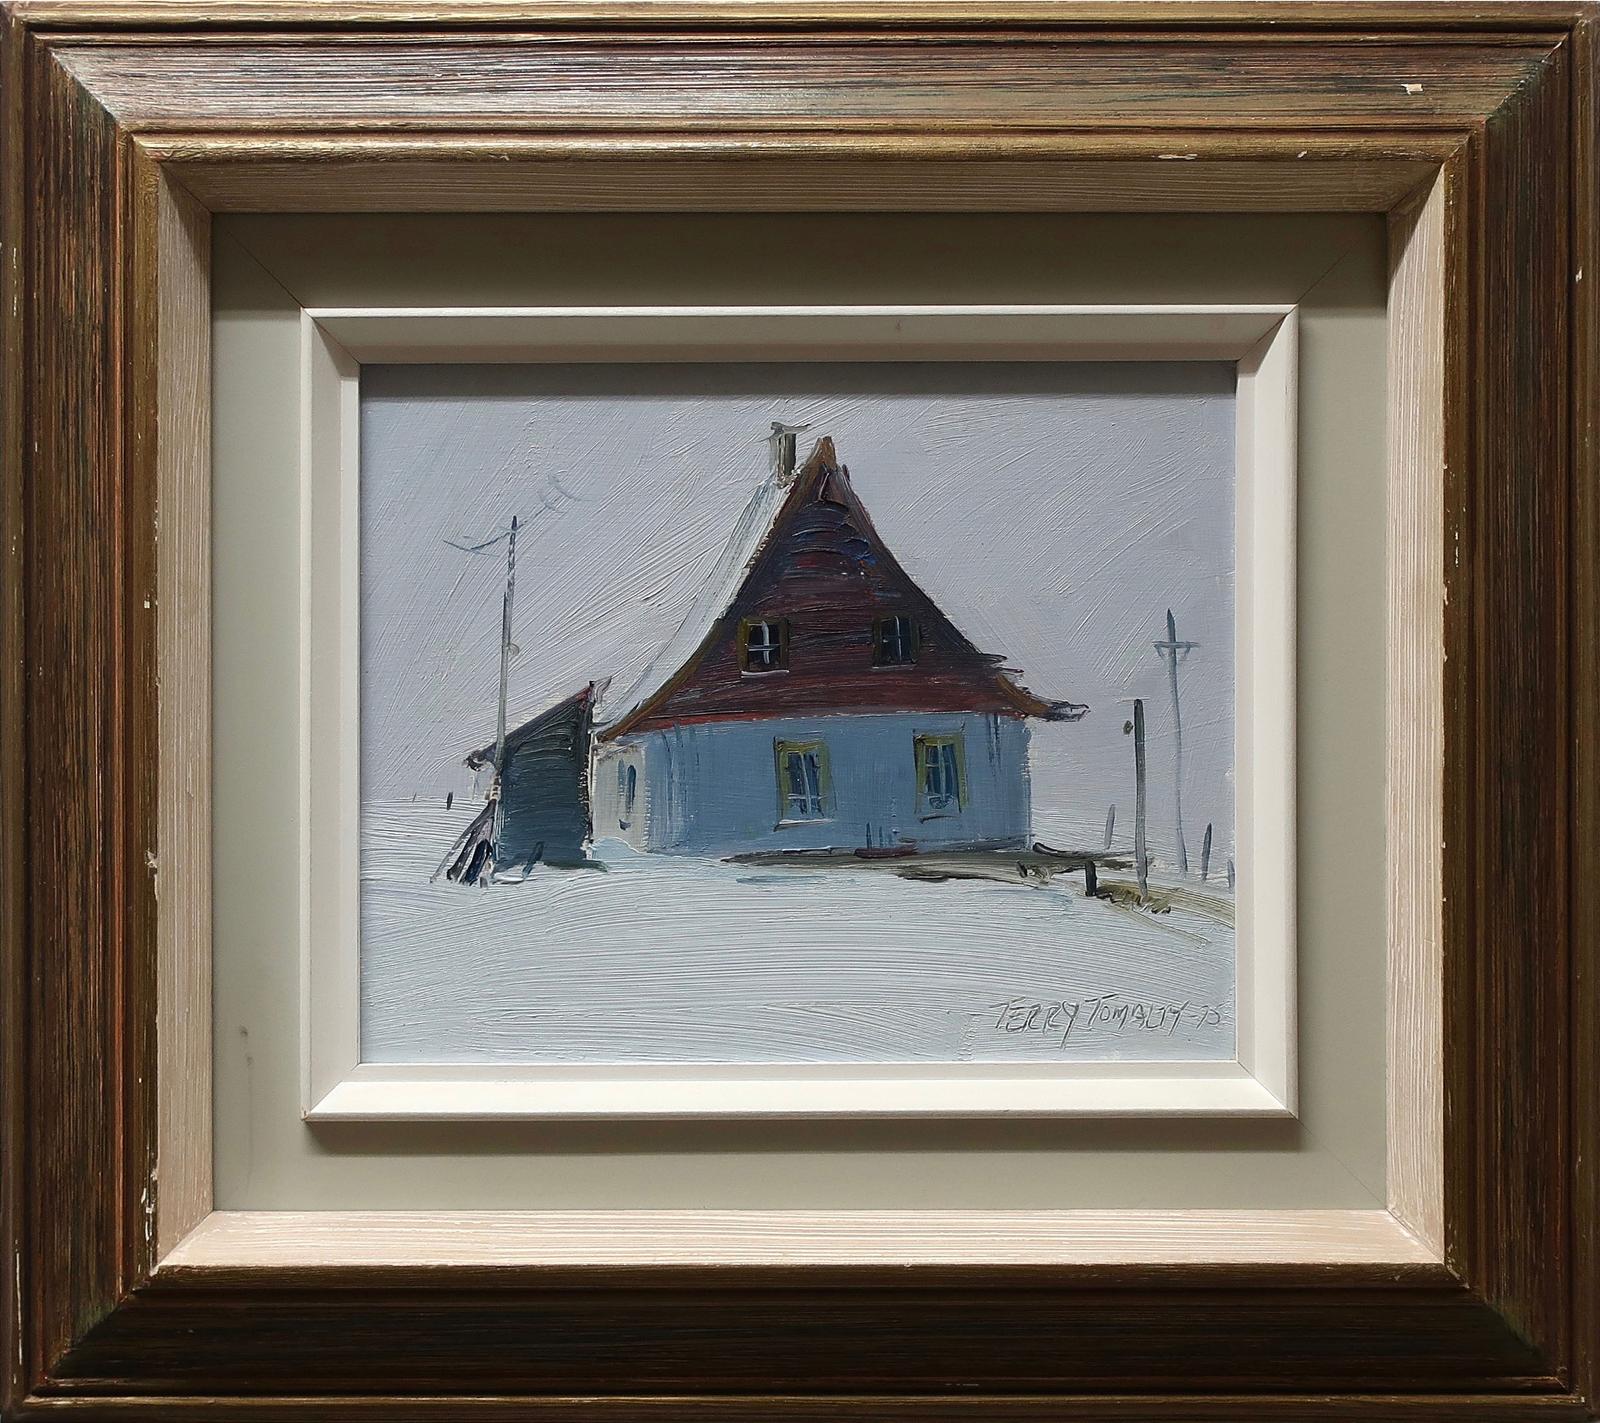 Terry Tomalty (1935) - Outhouse & Fog